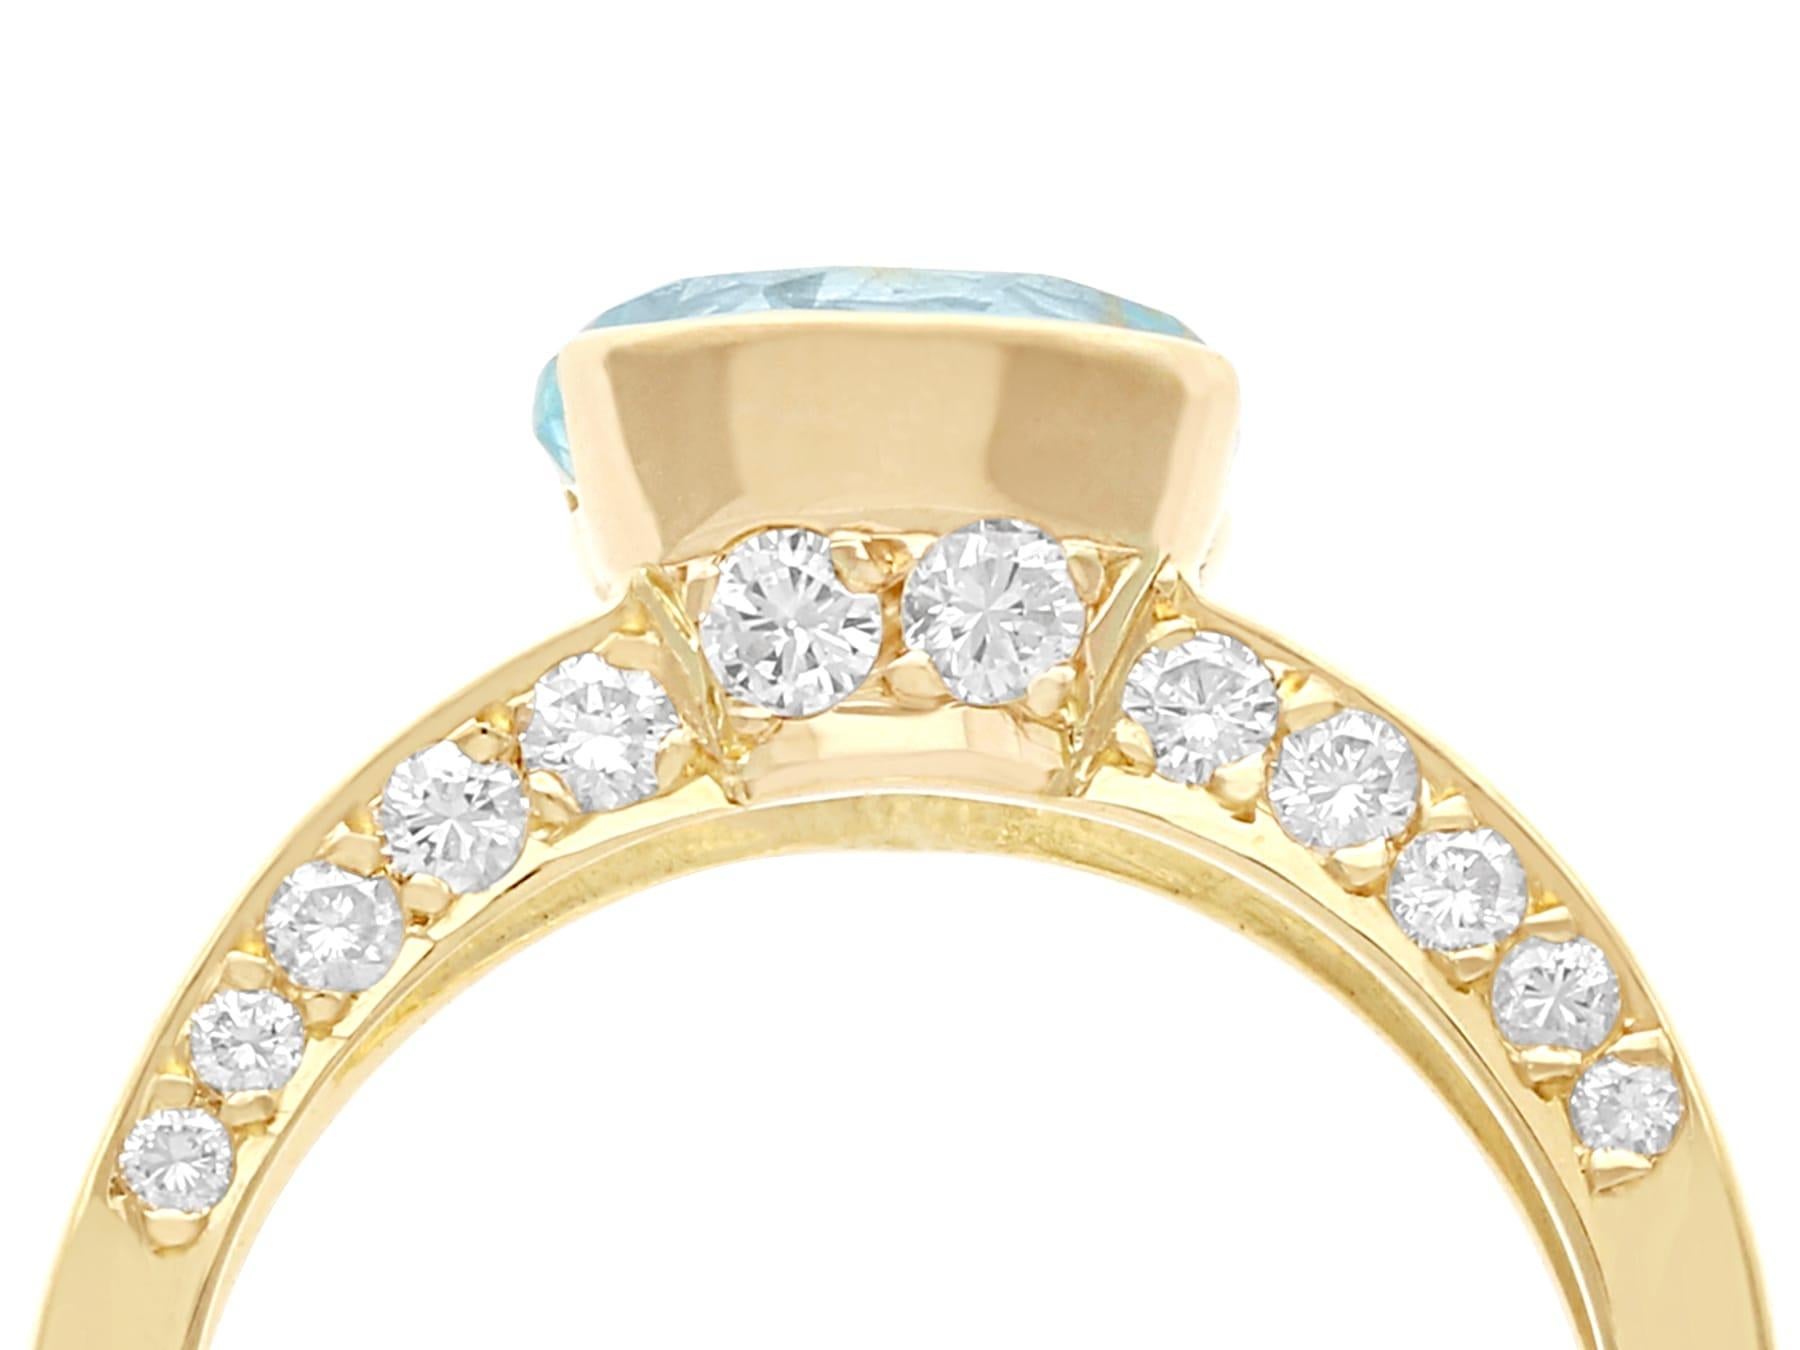 A fine and impressive vintage French 1.91 carat diamond and 1.63 ct aquamarine, 18 karat yellow gold dress ring; part of our diverse diamond jewelry and estate jewelry collections.

This stunning, fine and impressive aquamarine ring with diamonds